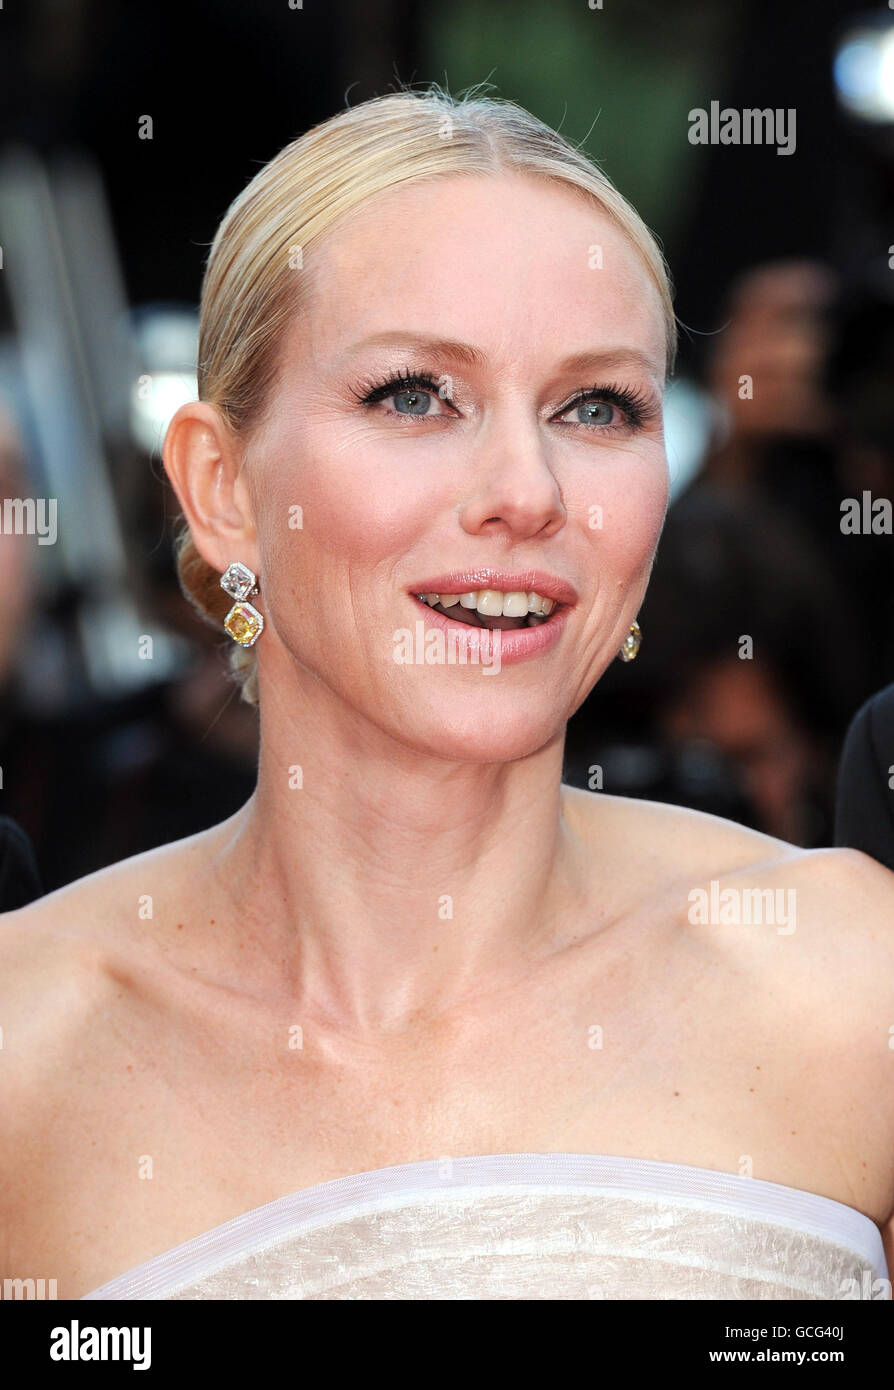 Actress Naomi Watts attends premiere for Fair Game, a film based on the true story of Whitehouse scandal, in which she plays outed CIA agent, Valerie Plame Wilson, the wife of journalist Joseph Wilson who was critical of George W Bush's invasion of Iraq, during the 63rd Cannes Film Festival, France. PRESS ASSOCIATION Photo. Picture date: Thursday May 20, 2010. See PA story SHOWBIZ Cannes. Photo credit should read: Fiona Hanson/PA Wire Stock Photo